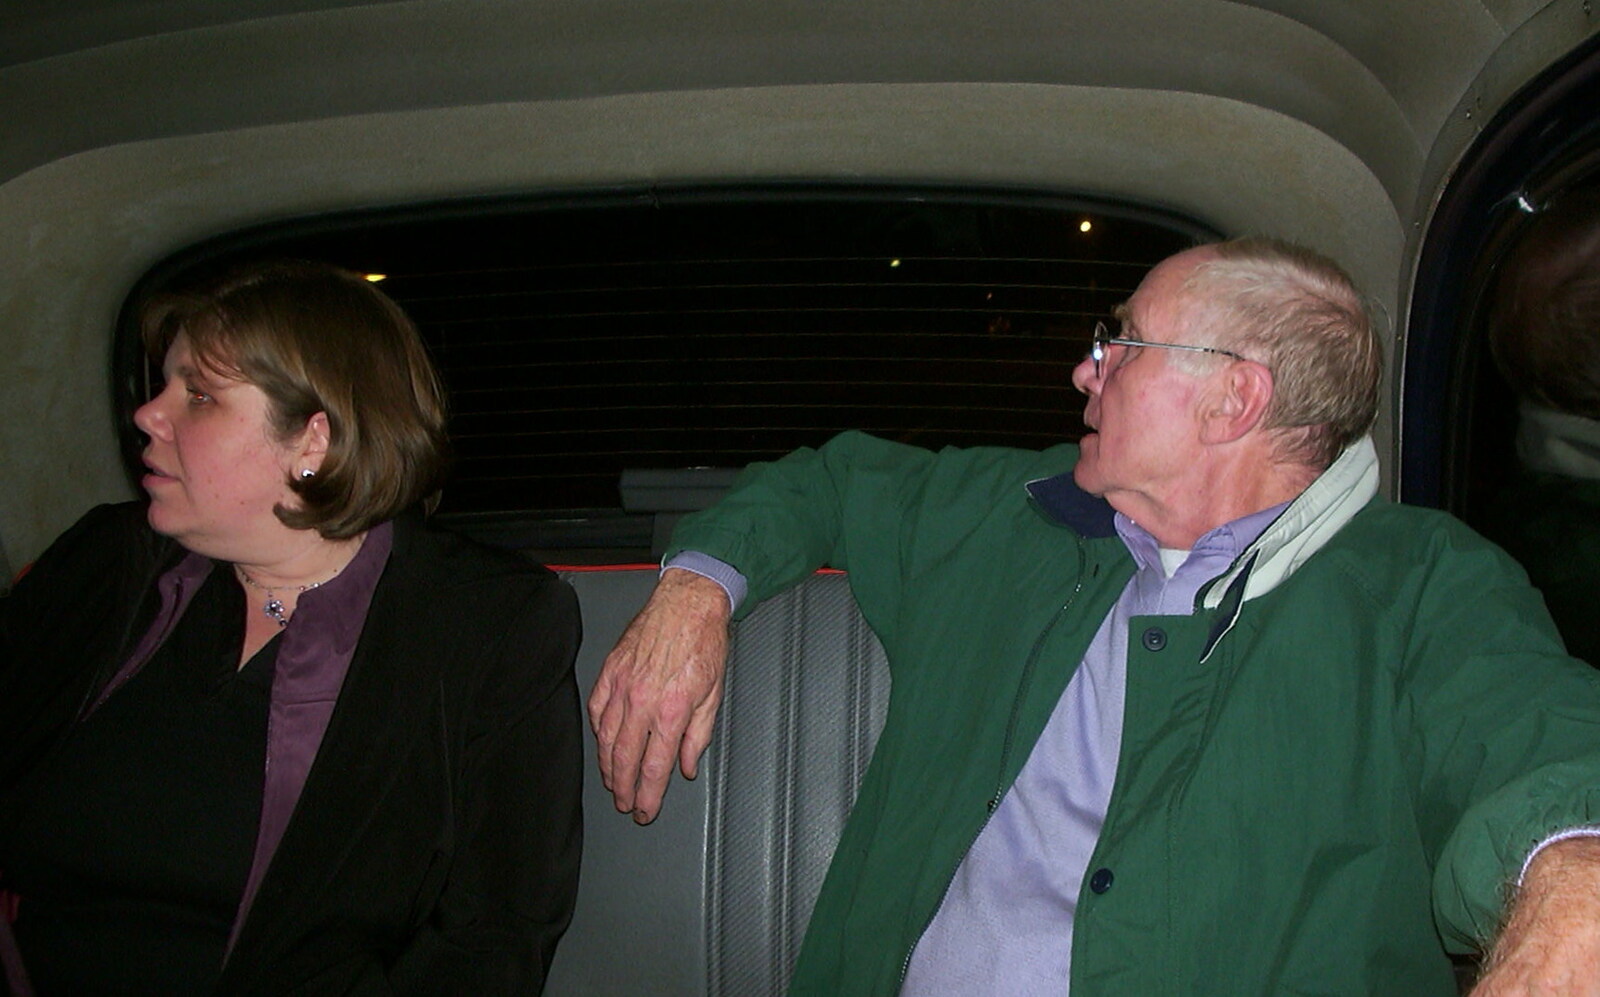 A BSCC Presentation, Brome Swan, Suffolk - 9th November 2002: Sis and the Old Chap in the back of a taxi